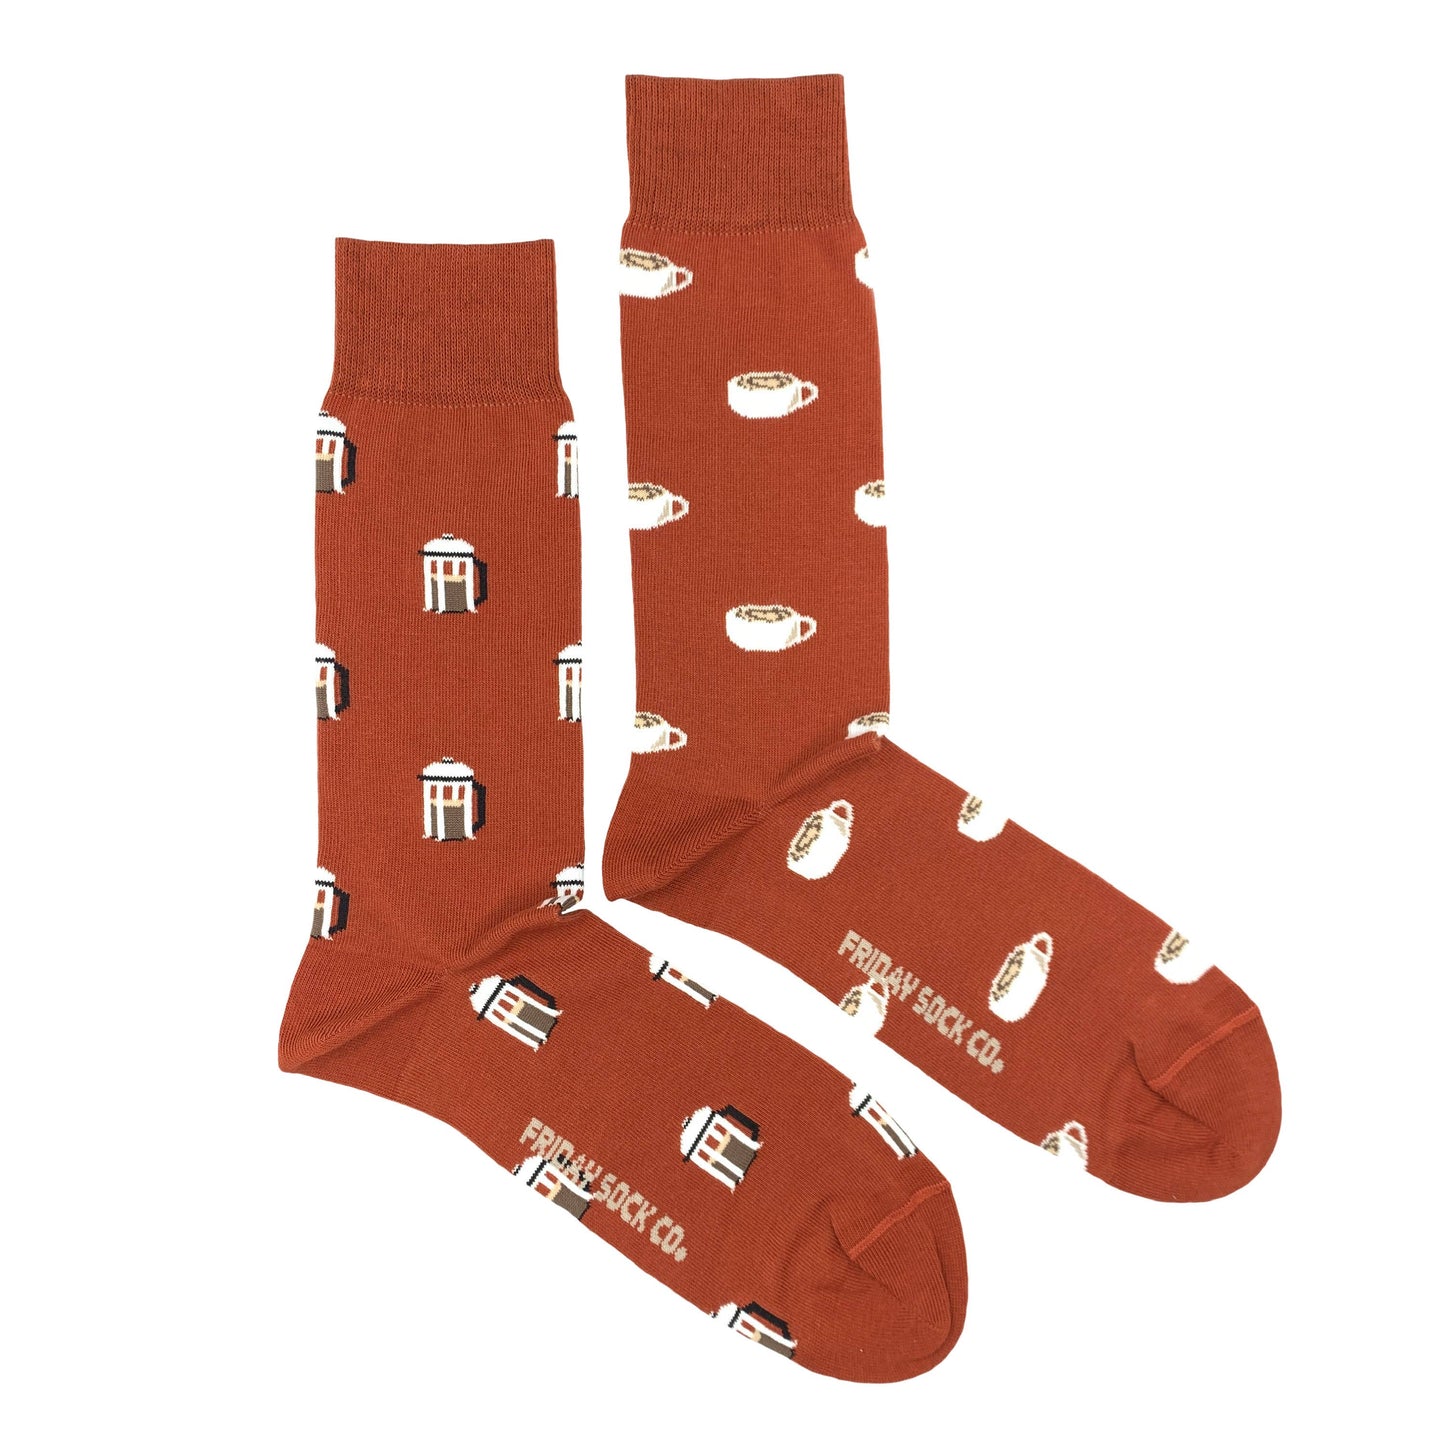 French Press & Coffee Mismached Mens Socks